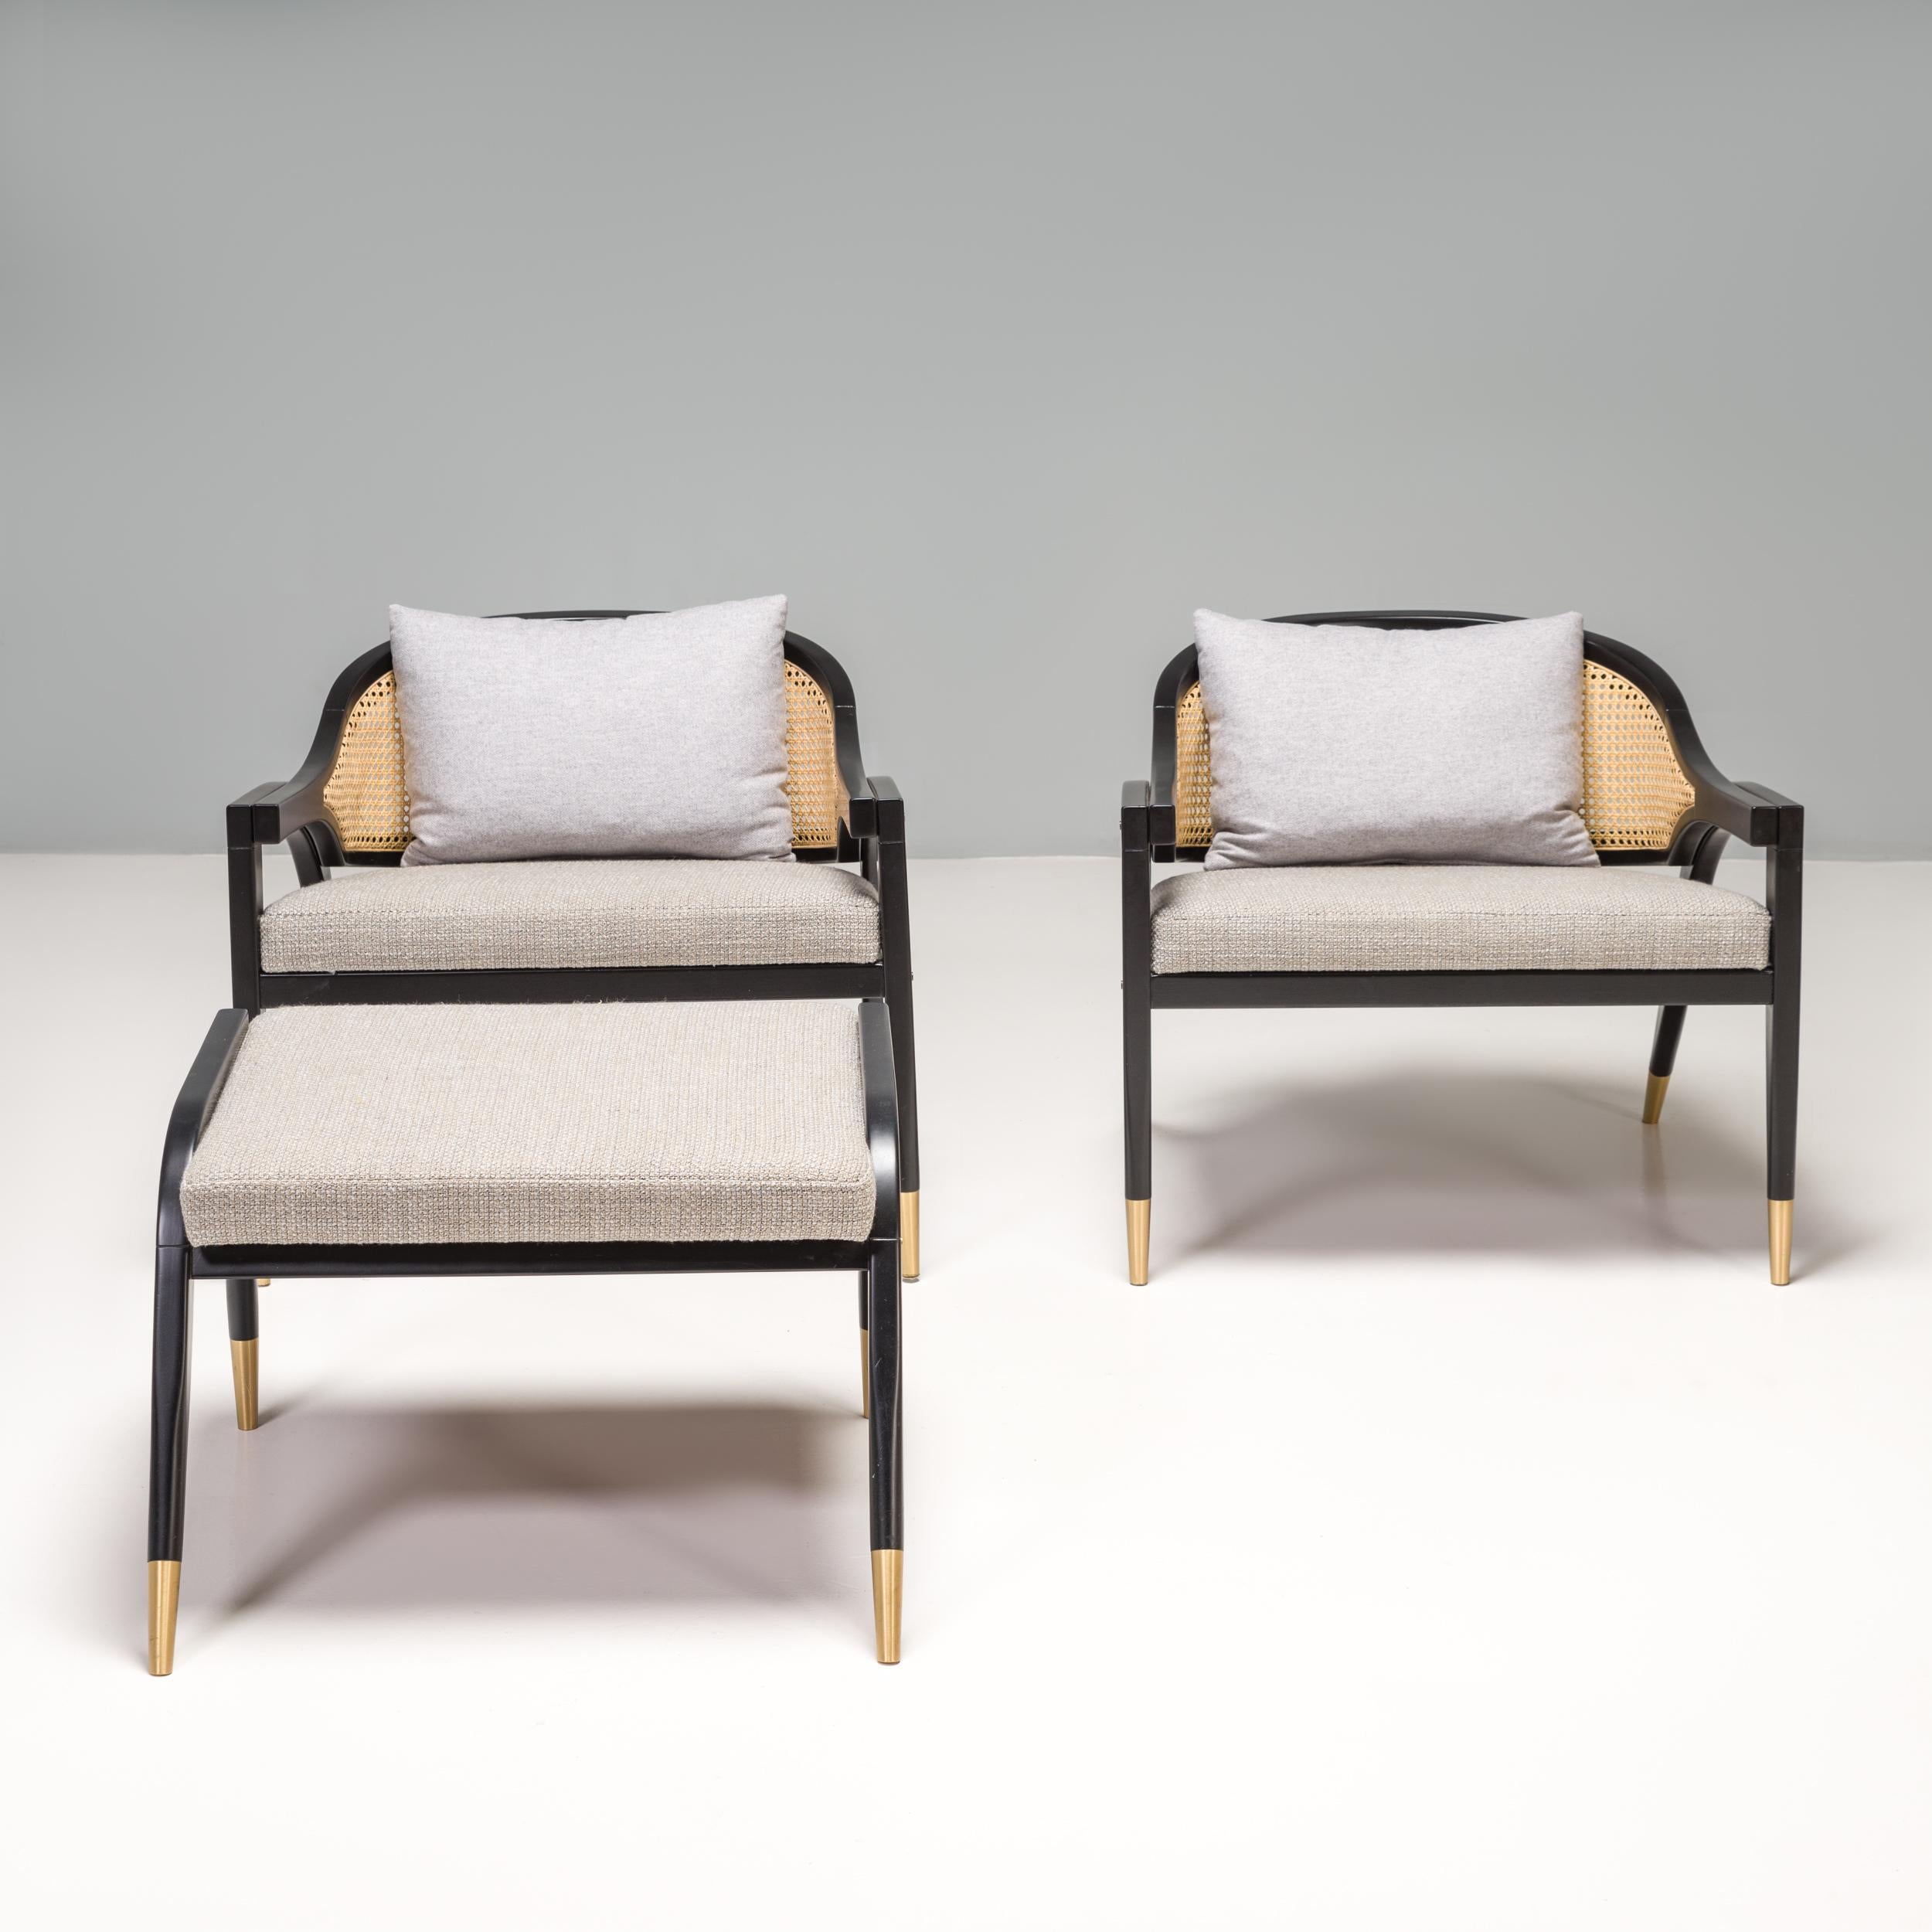 American Classical Duistt Wormley Cane and Brass Armchairs & Footstool, Set of 2 For Sale